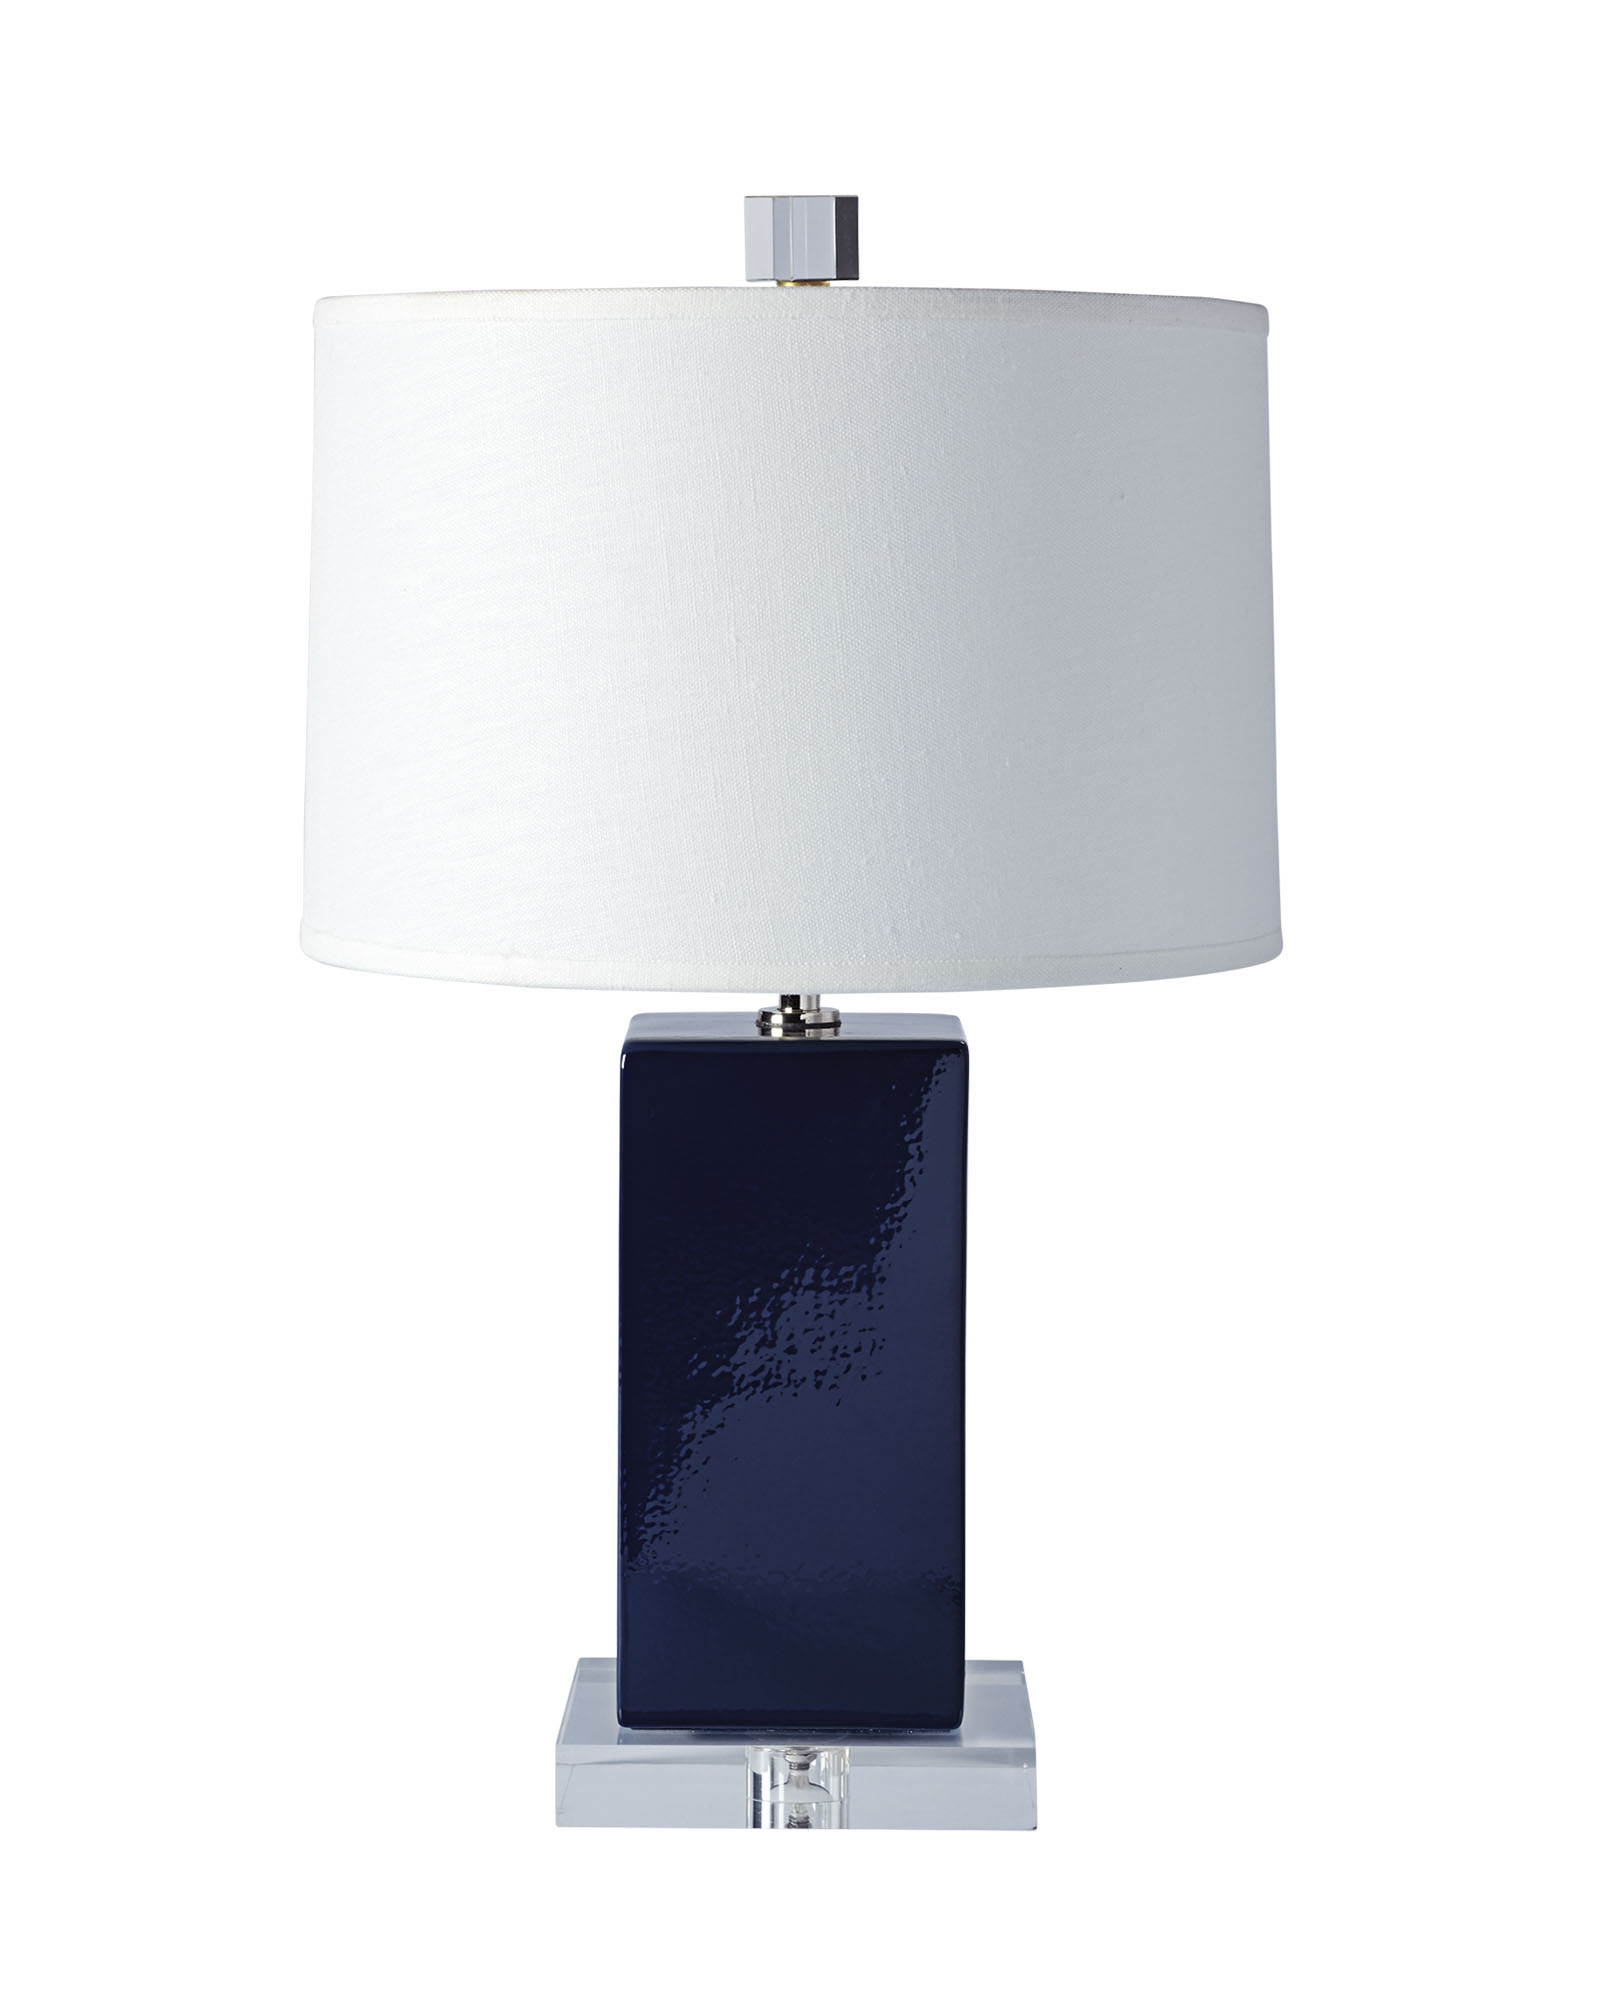 Darby Table Lamp - Navy - Image 0